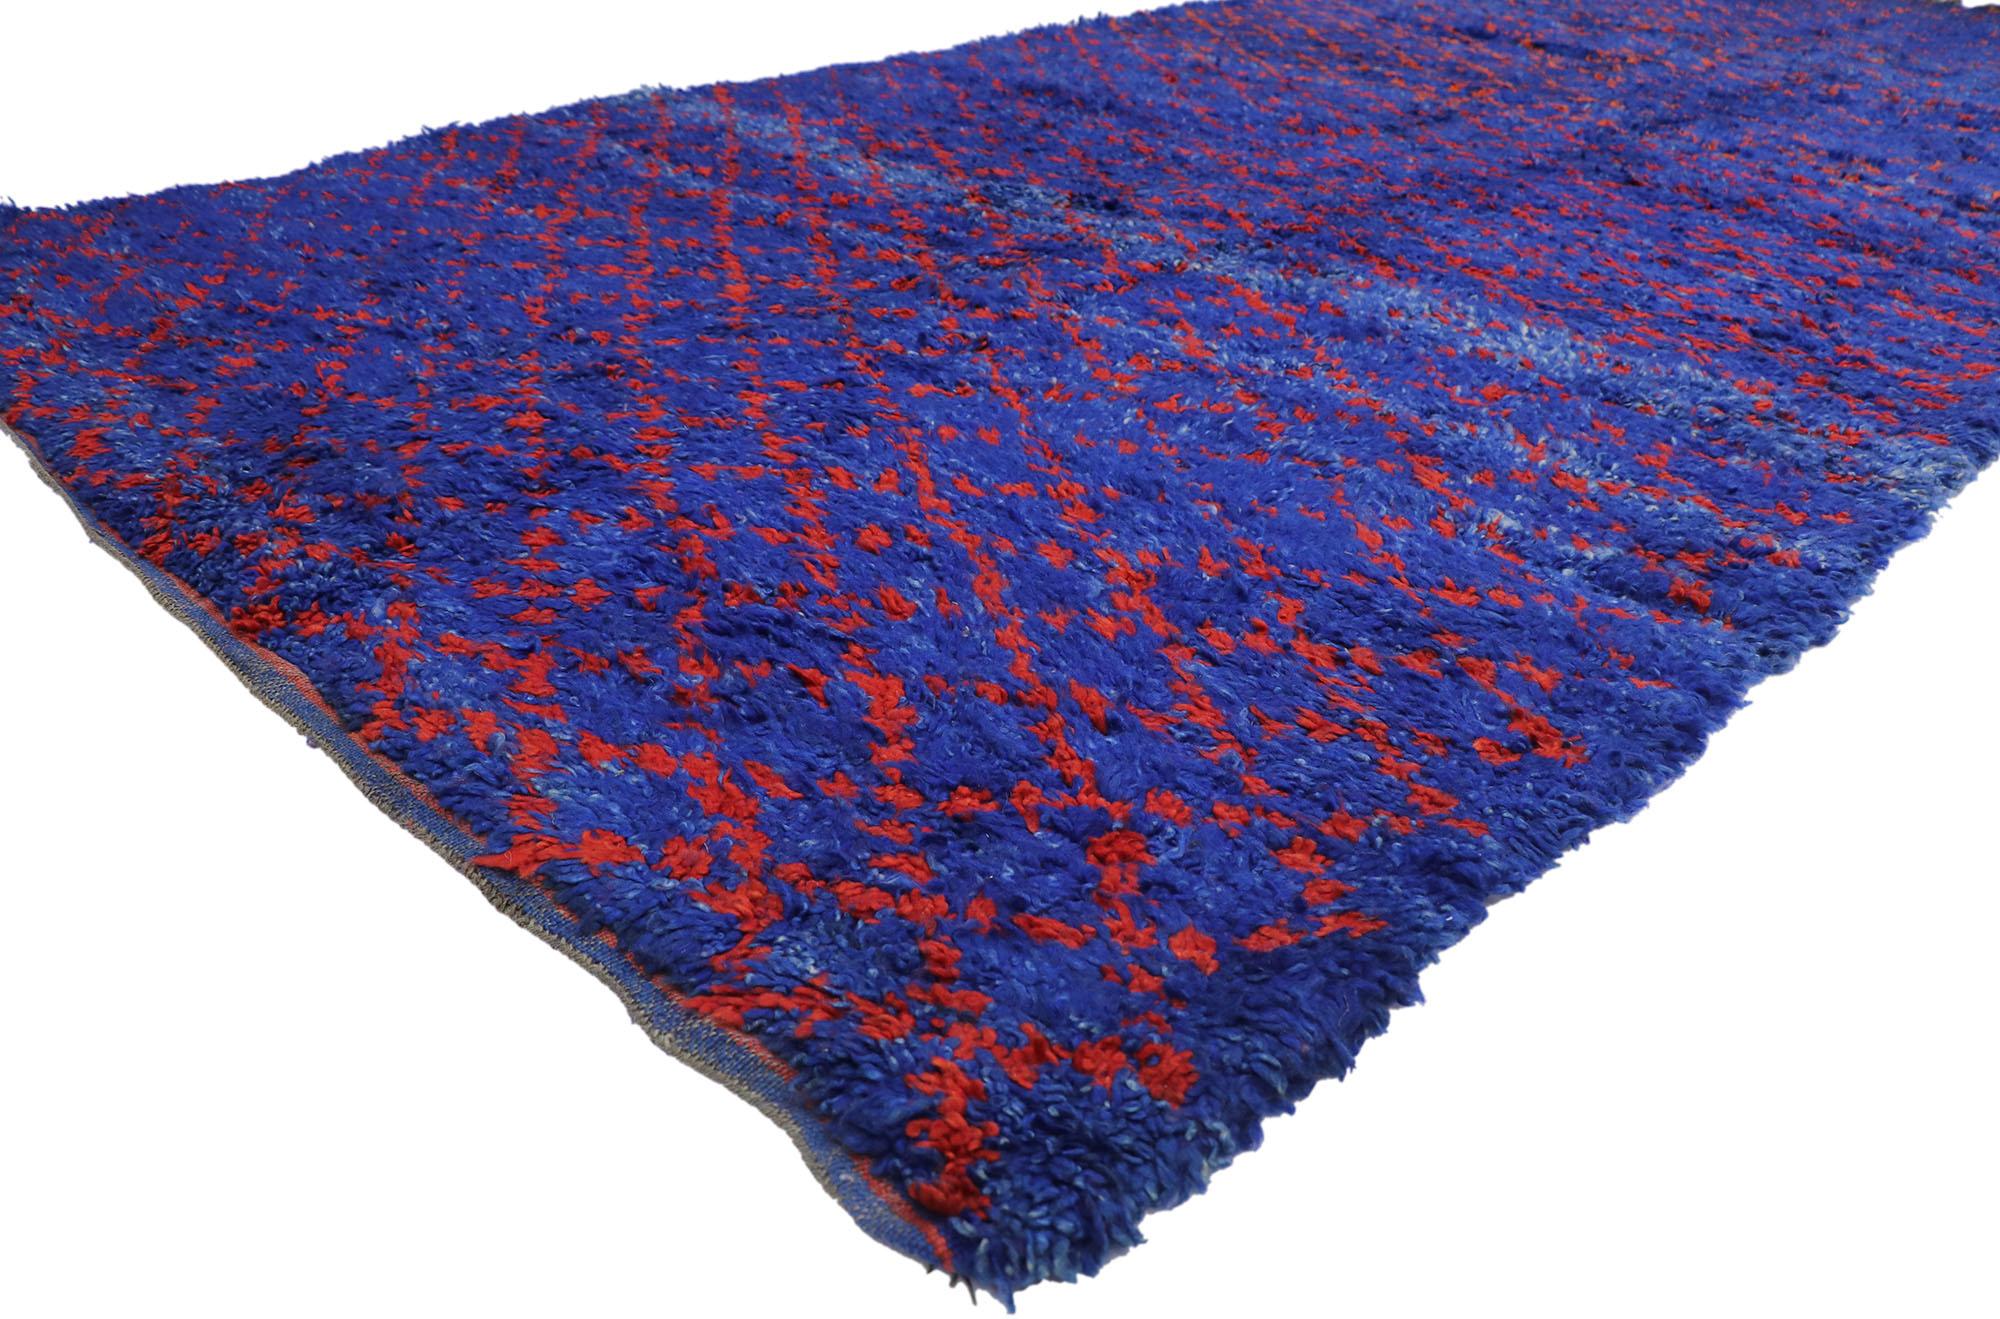 21237 Vintage Blue Beni M'Guild Moroccan Rug, 6'03 x 13'03. Nestled within the scenic landscapes of Morocco's Middle Atlas Mountains, Beni M'Guild rugs embody a treasured Berber tradition, meticulously handcrafted by skilled artisans using